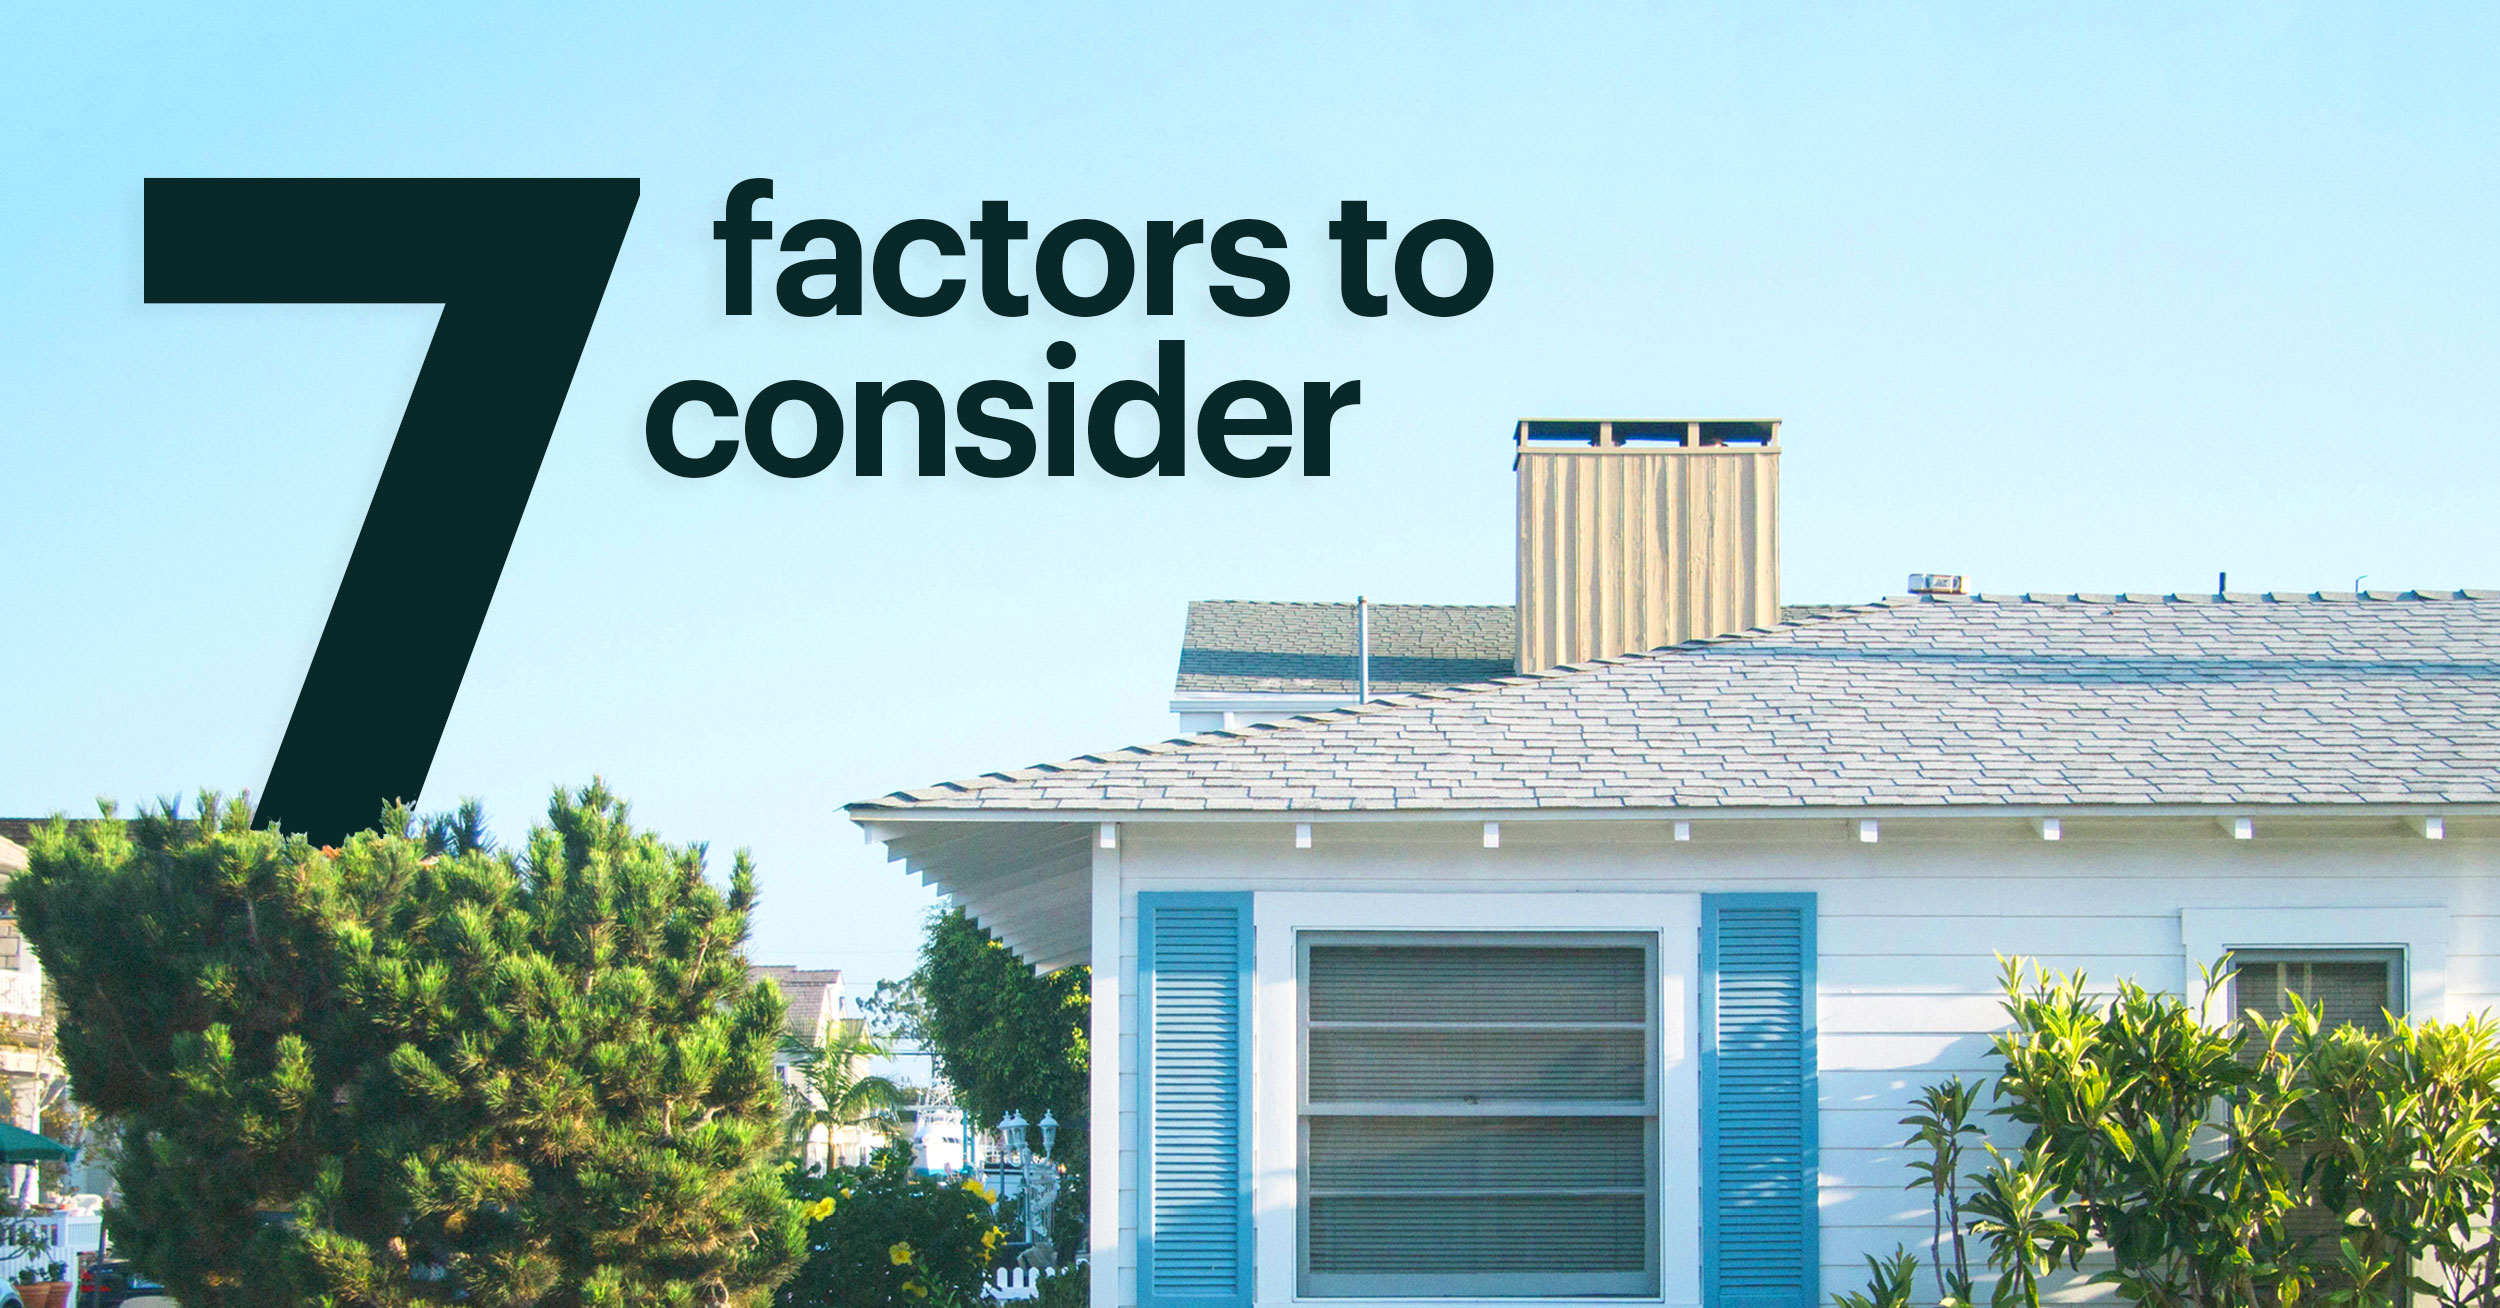  Blue Bungalow Style Home Against Blue Sky with Text That Reads: 7 Factors to Consider